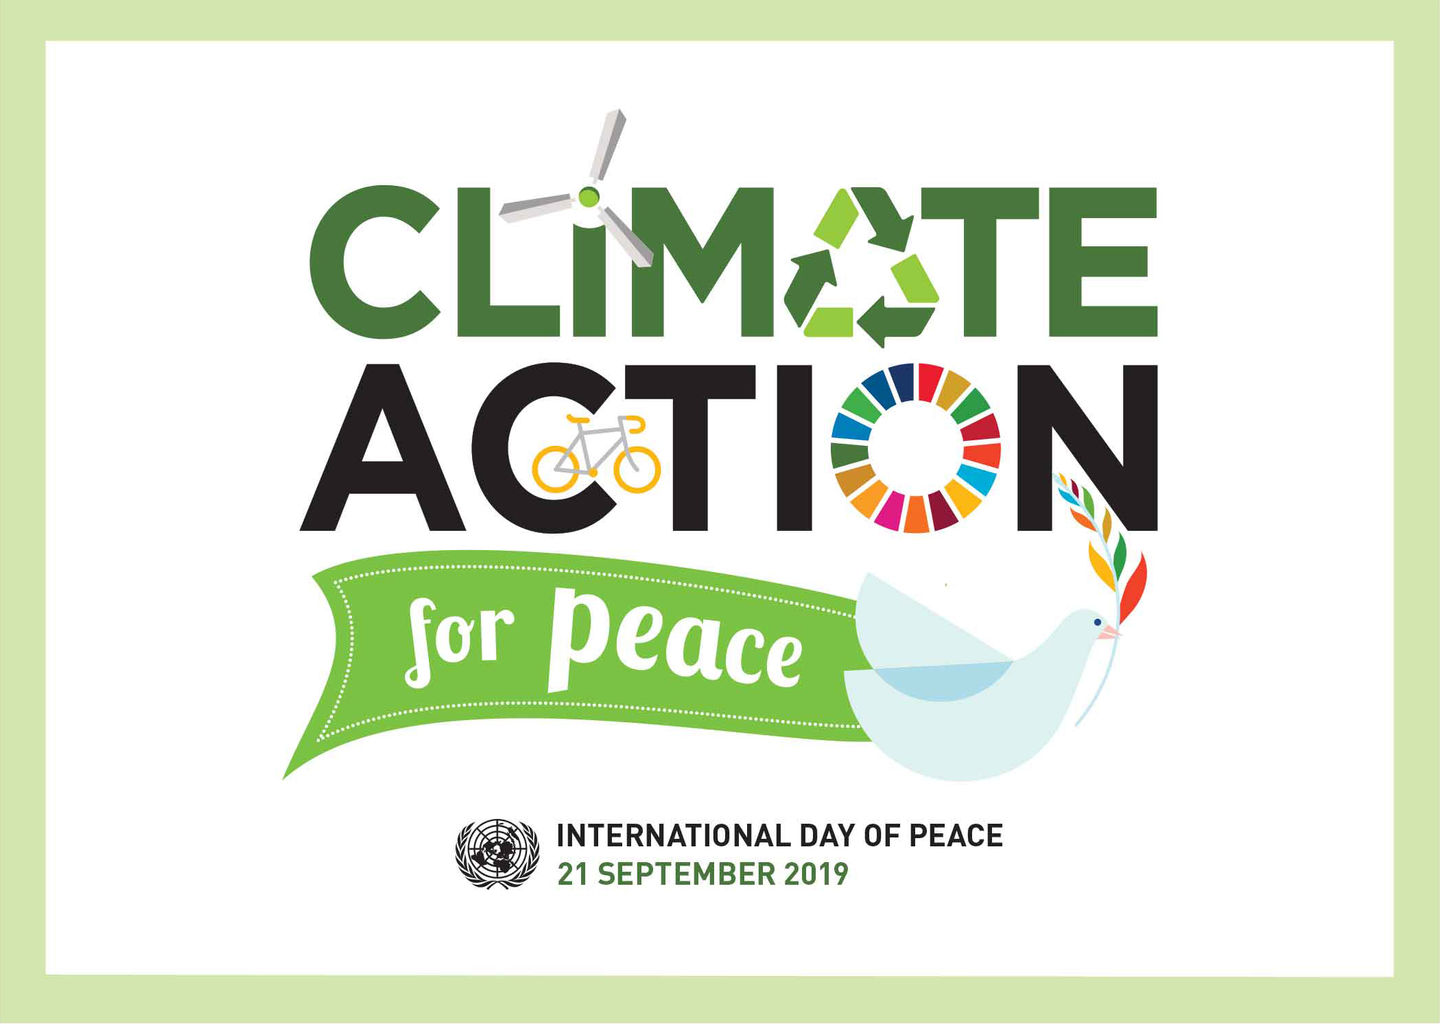 International Day of Peace Celebrated by UNITAR, JICA and